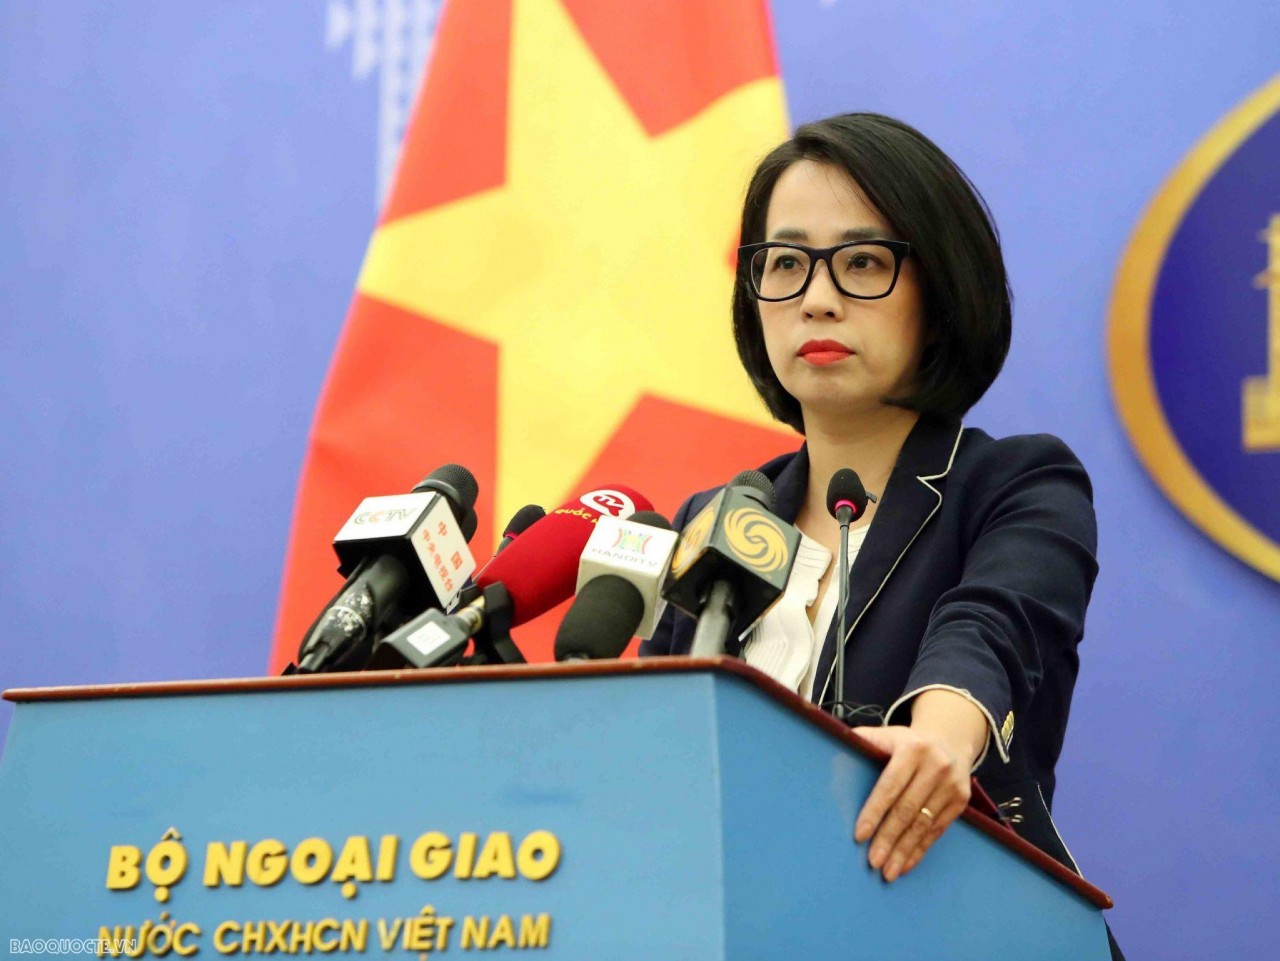 Foreign Ministry urges Vietnamese citizens to leave Israel, Myanmar immediately: Spokesperson